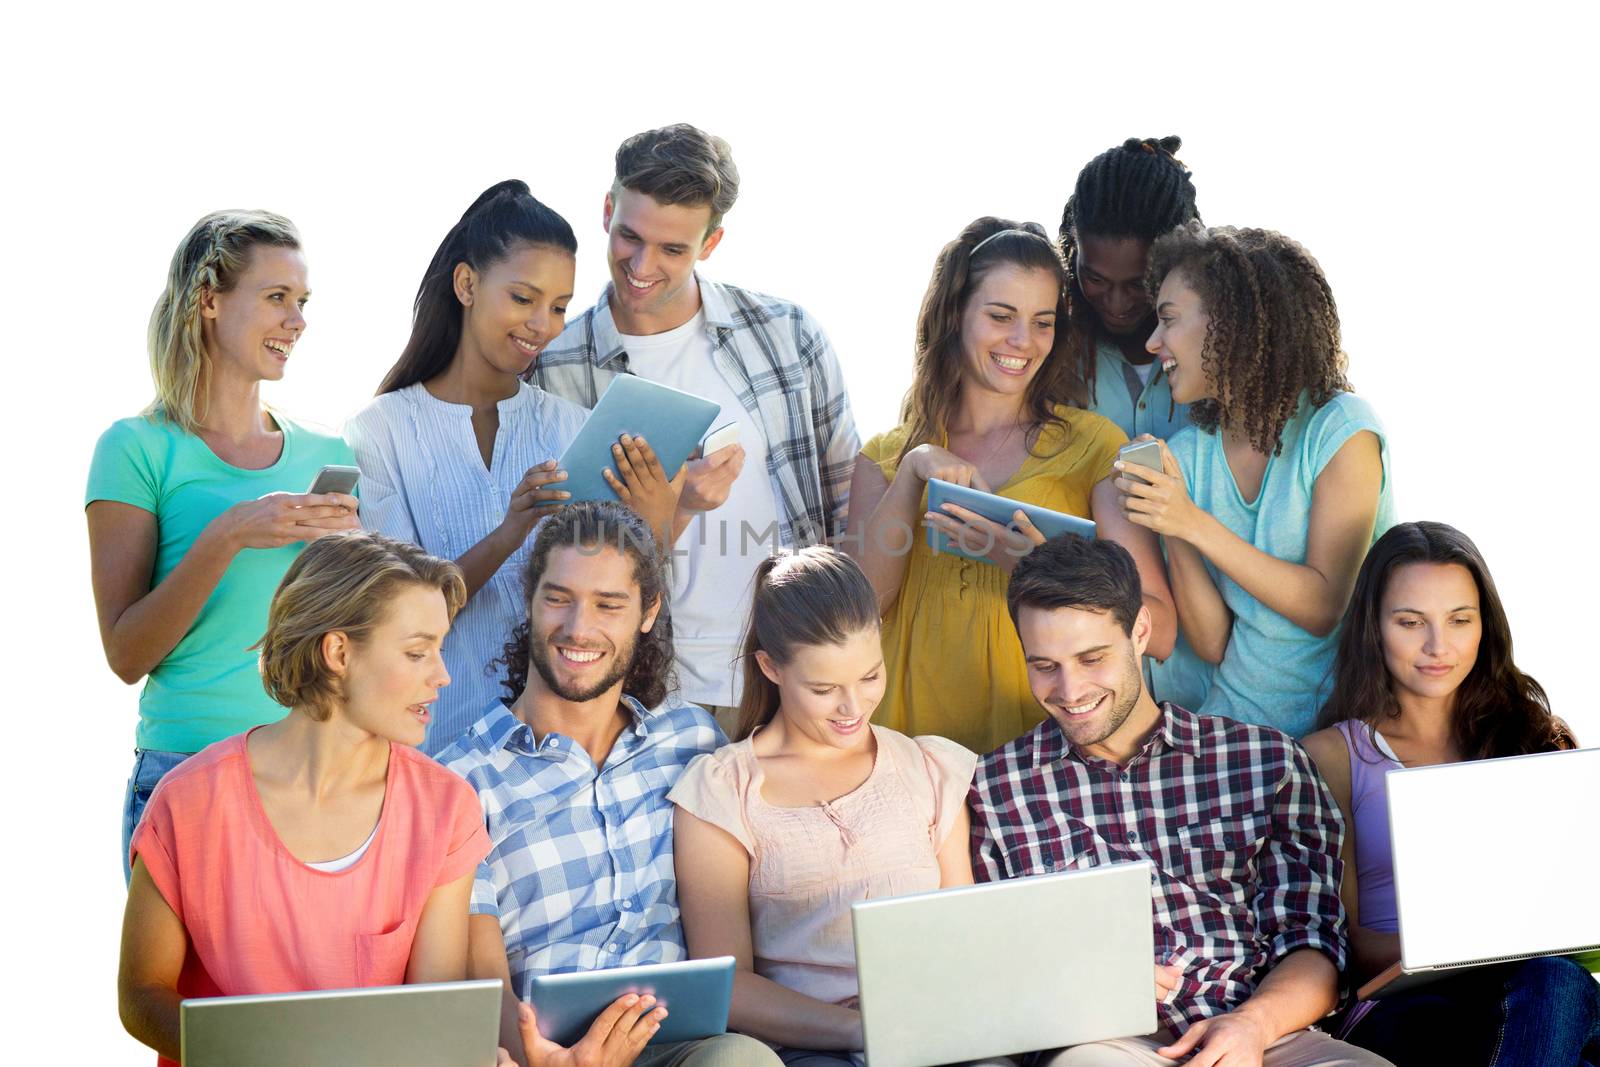 Composite image of several students using electronic devices by Wavebreakmedia